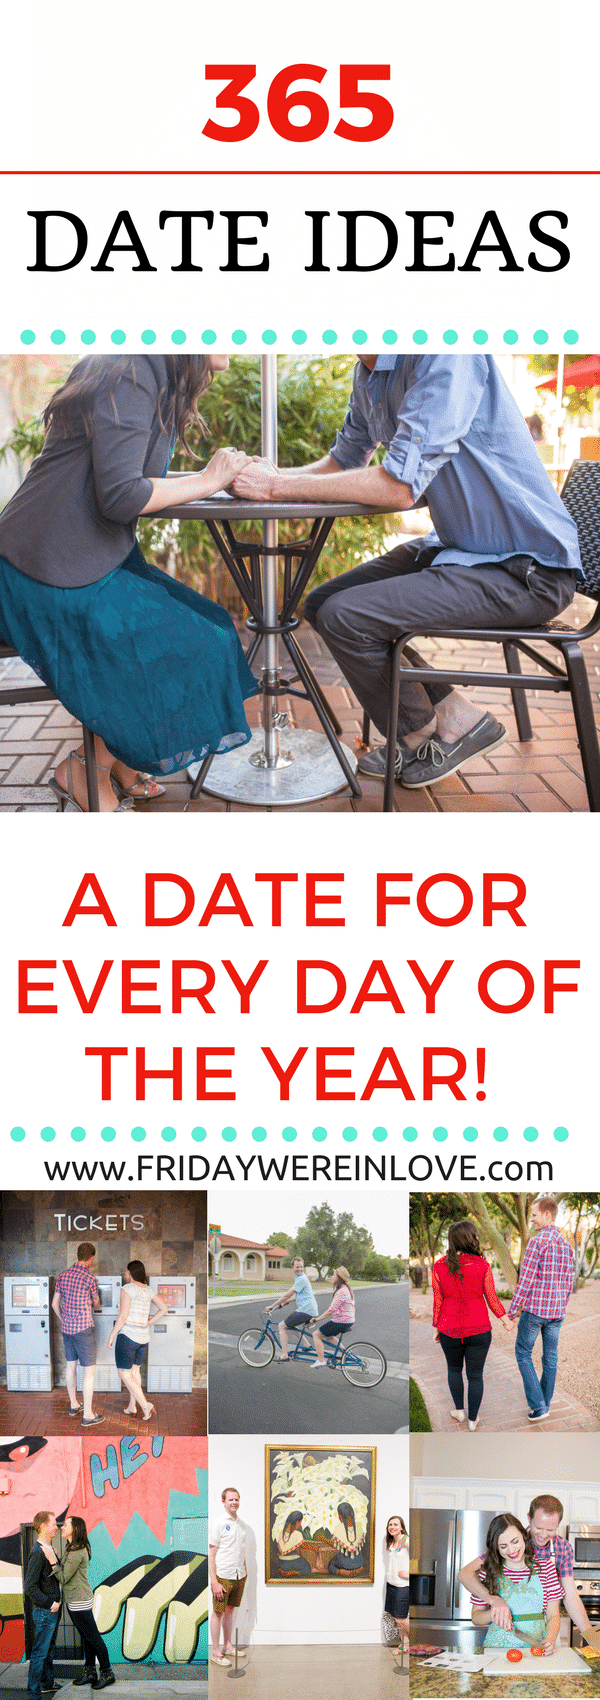 365 Fun Date Ideas: Dates Every Day of the Year